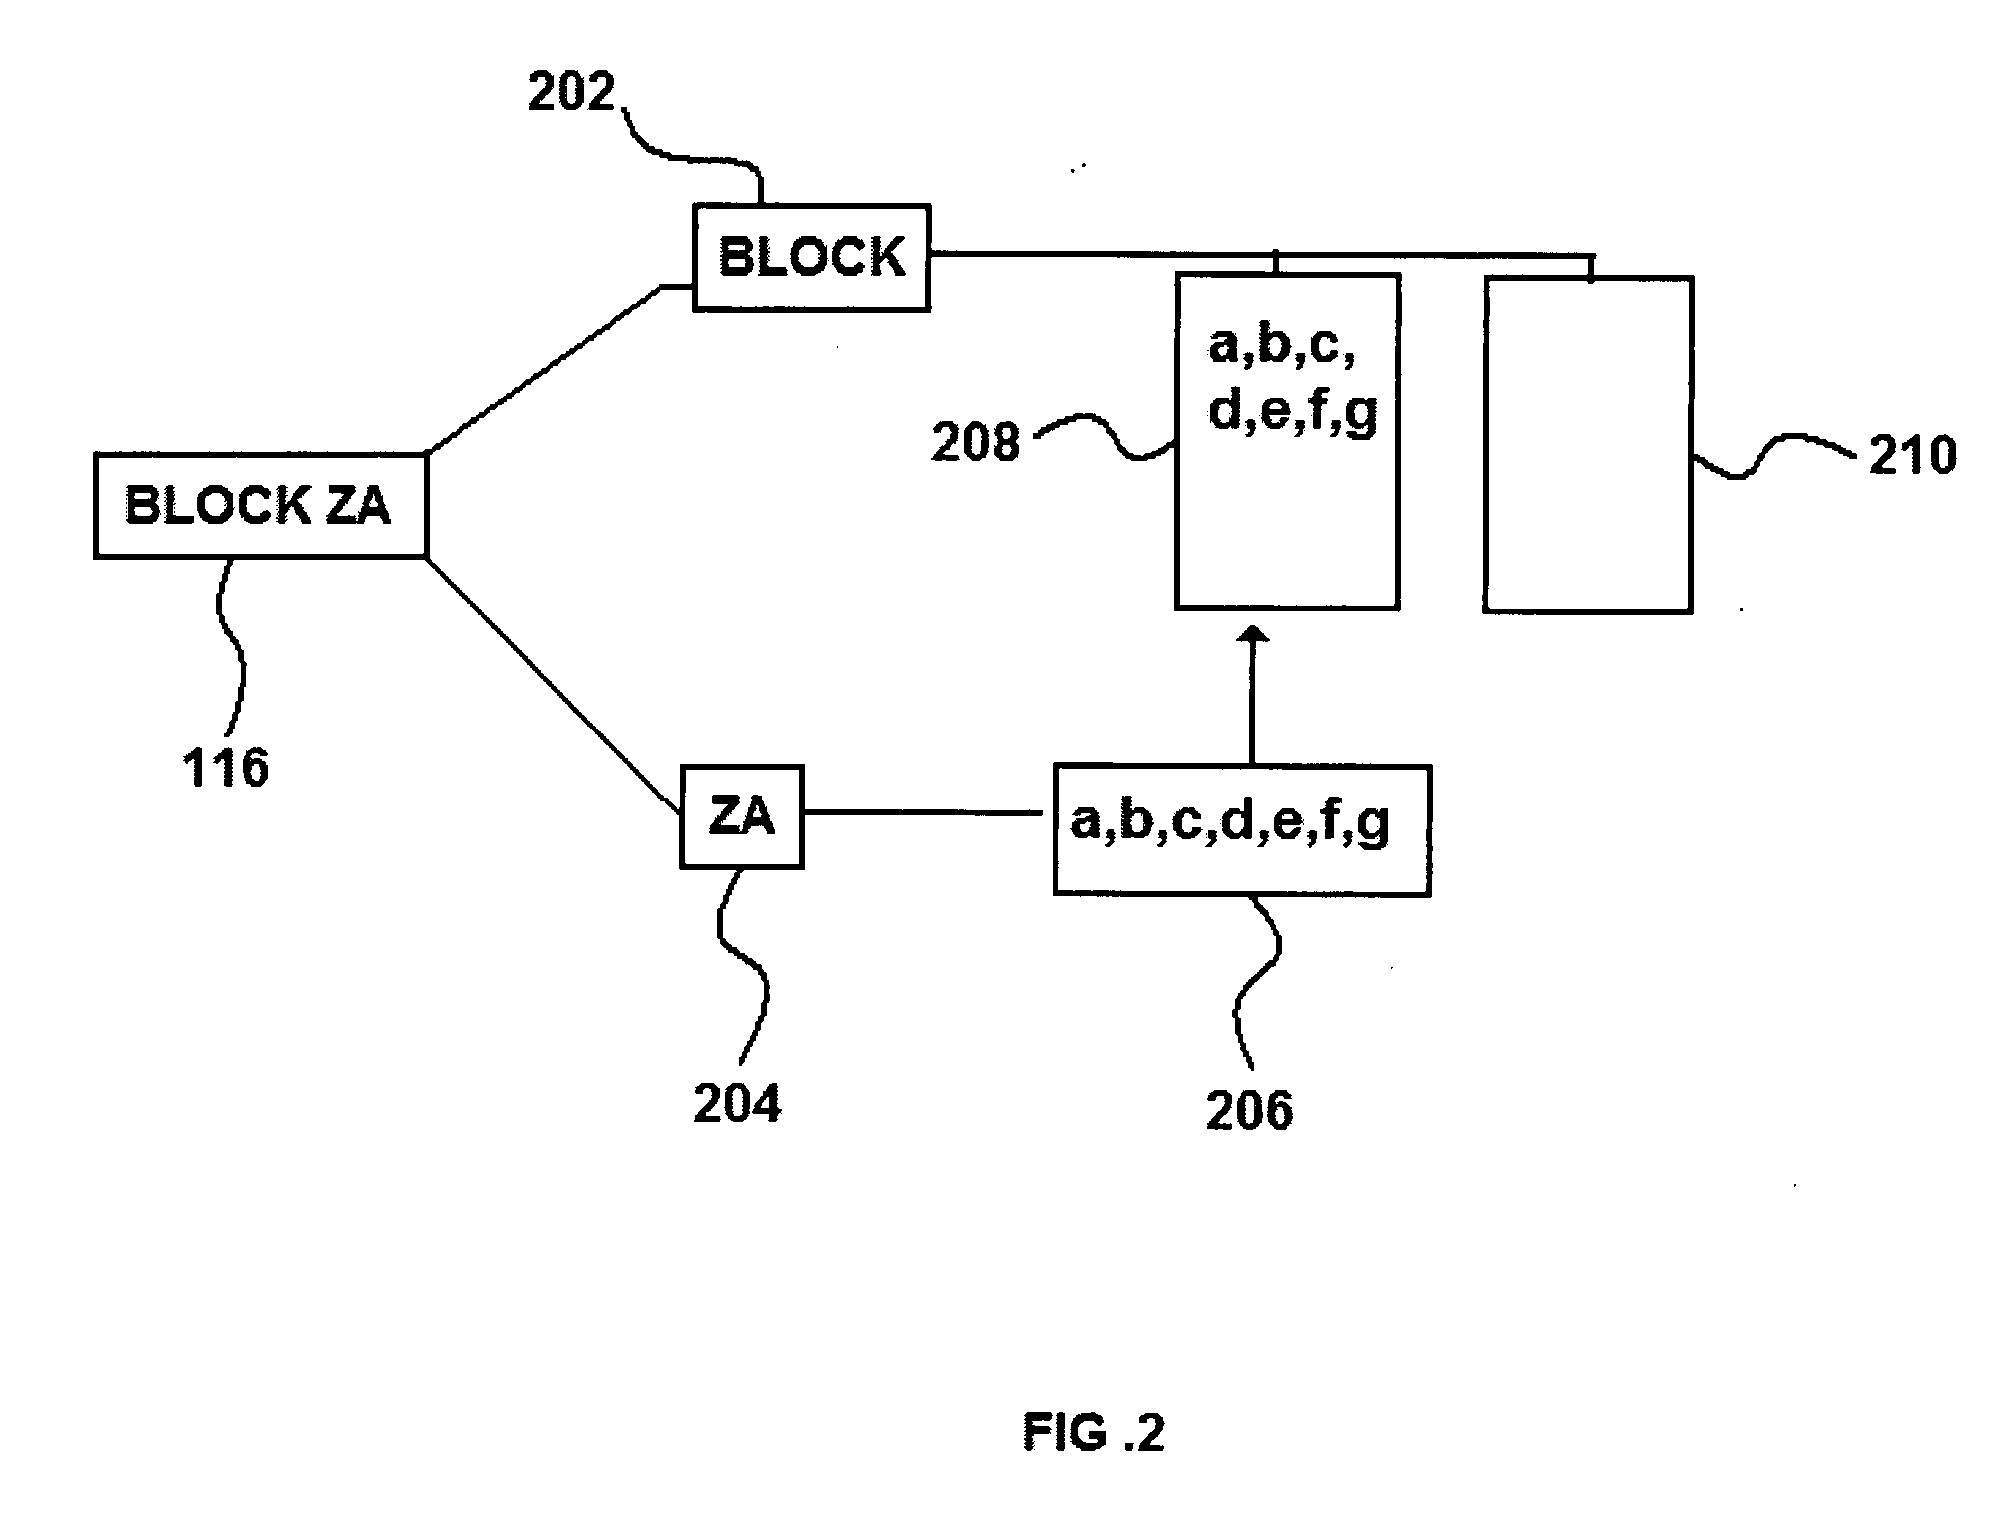 Method and apparatus for geographically regulating inbound and outbound network communications